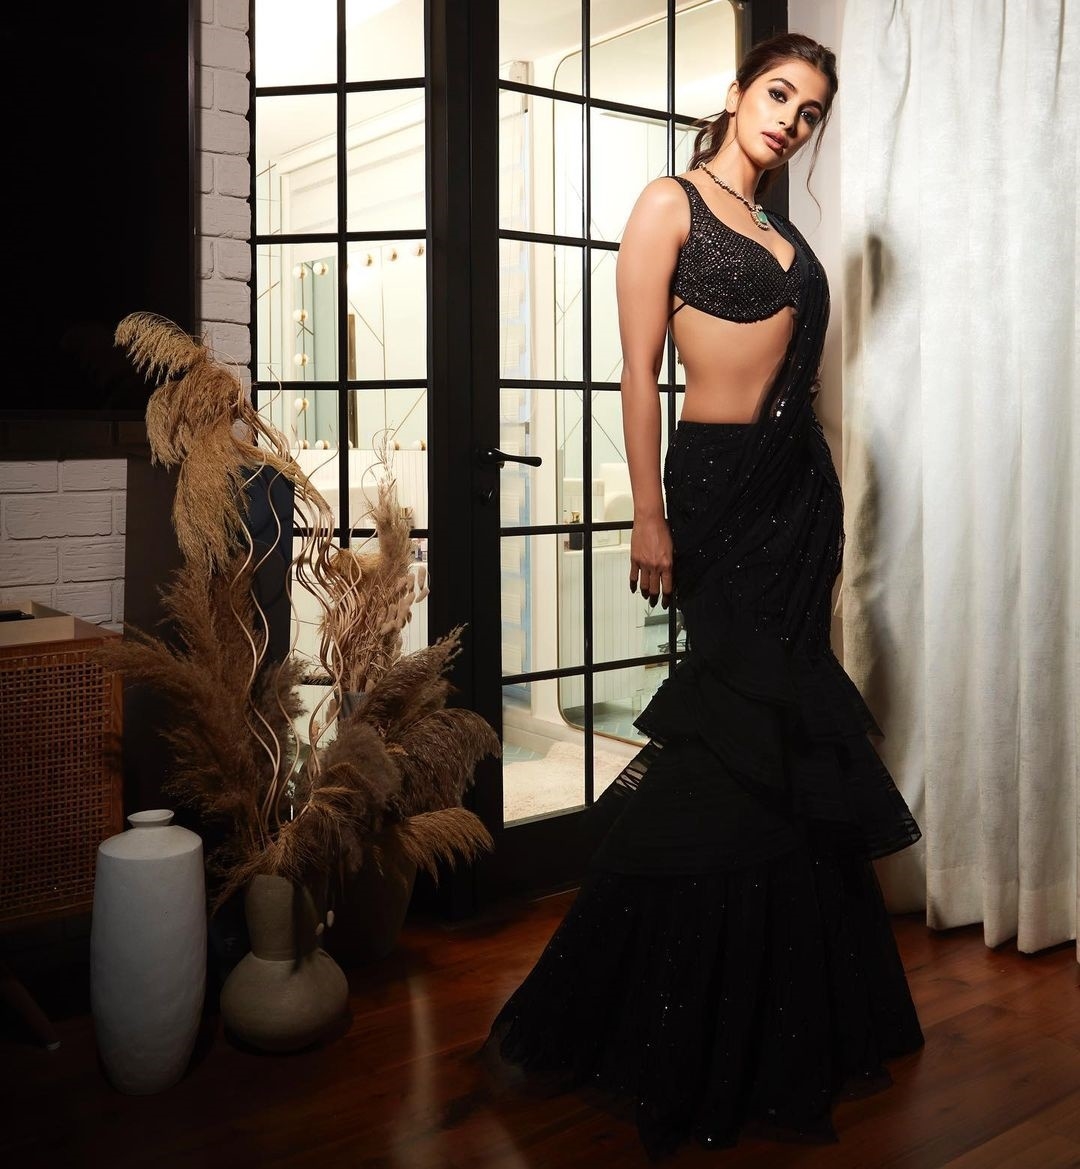 Pooja Hegde Tempting Hot Waist and Erotic Expression in Black Saree